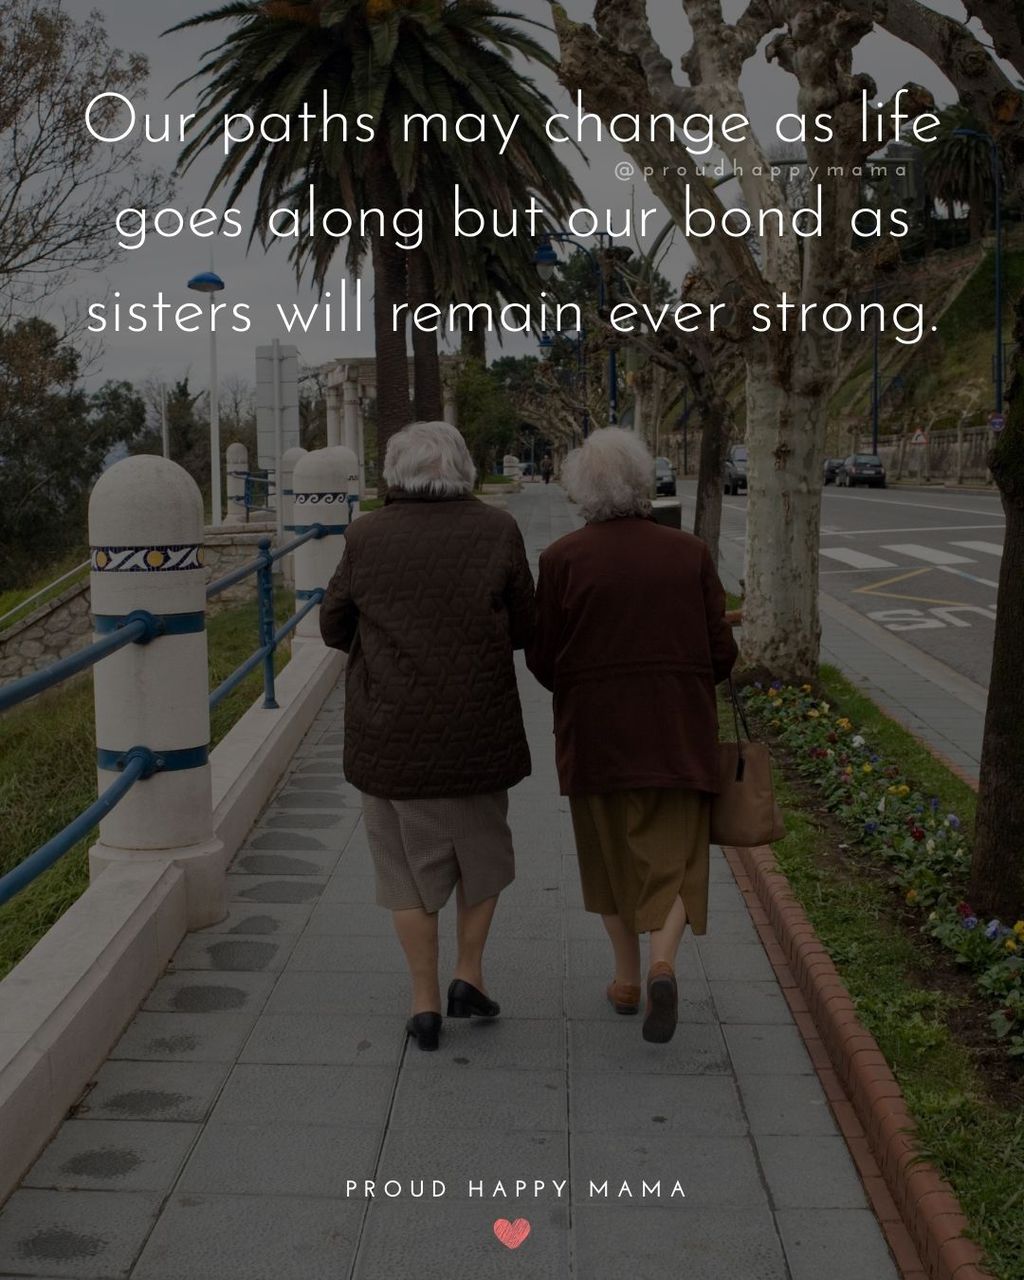 Sister Quotes - Our paths may change as life goes along but our bond as sisters will remain ever strong.